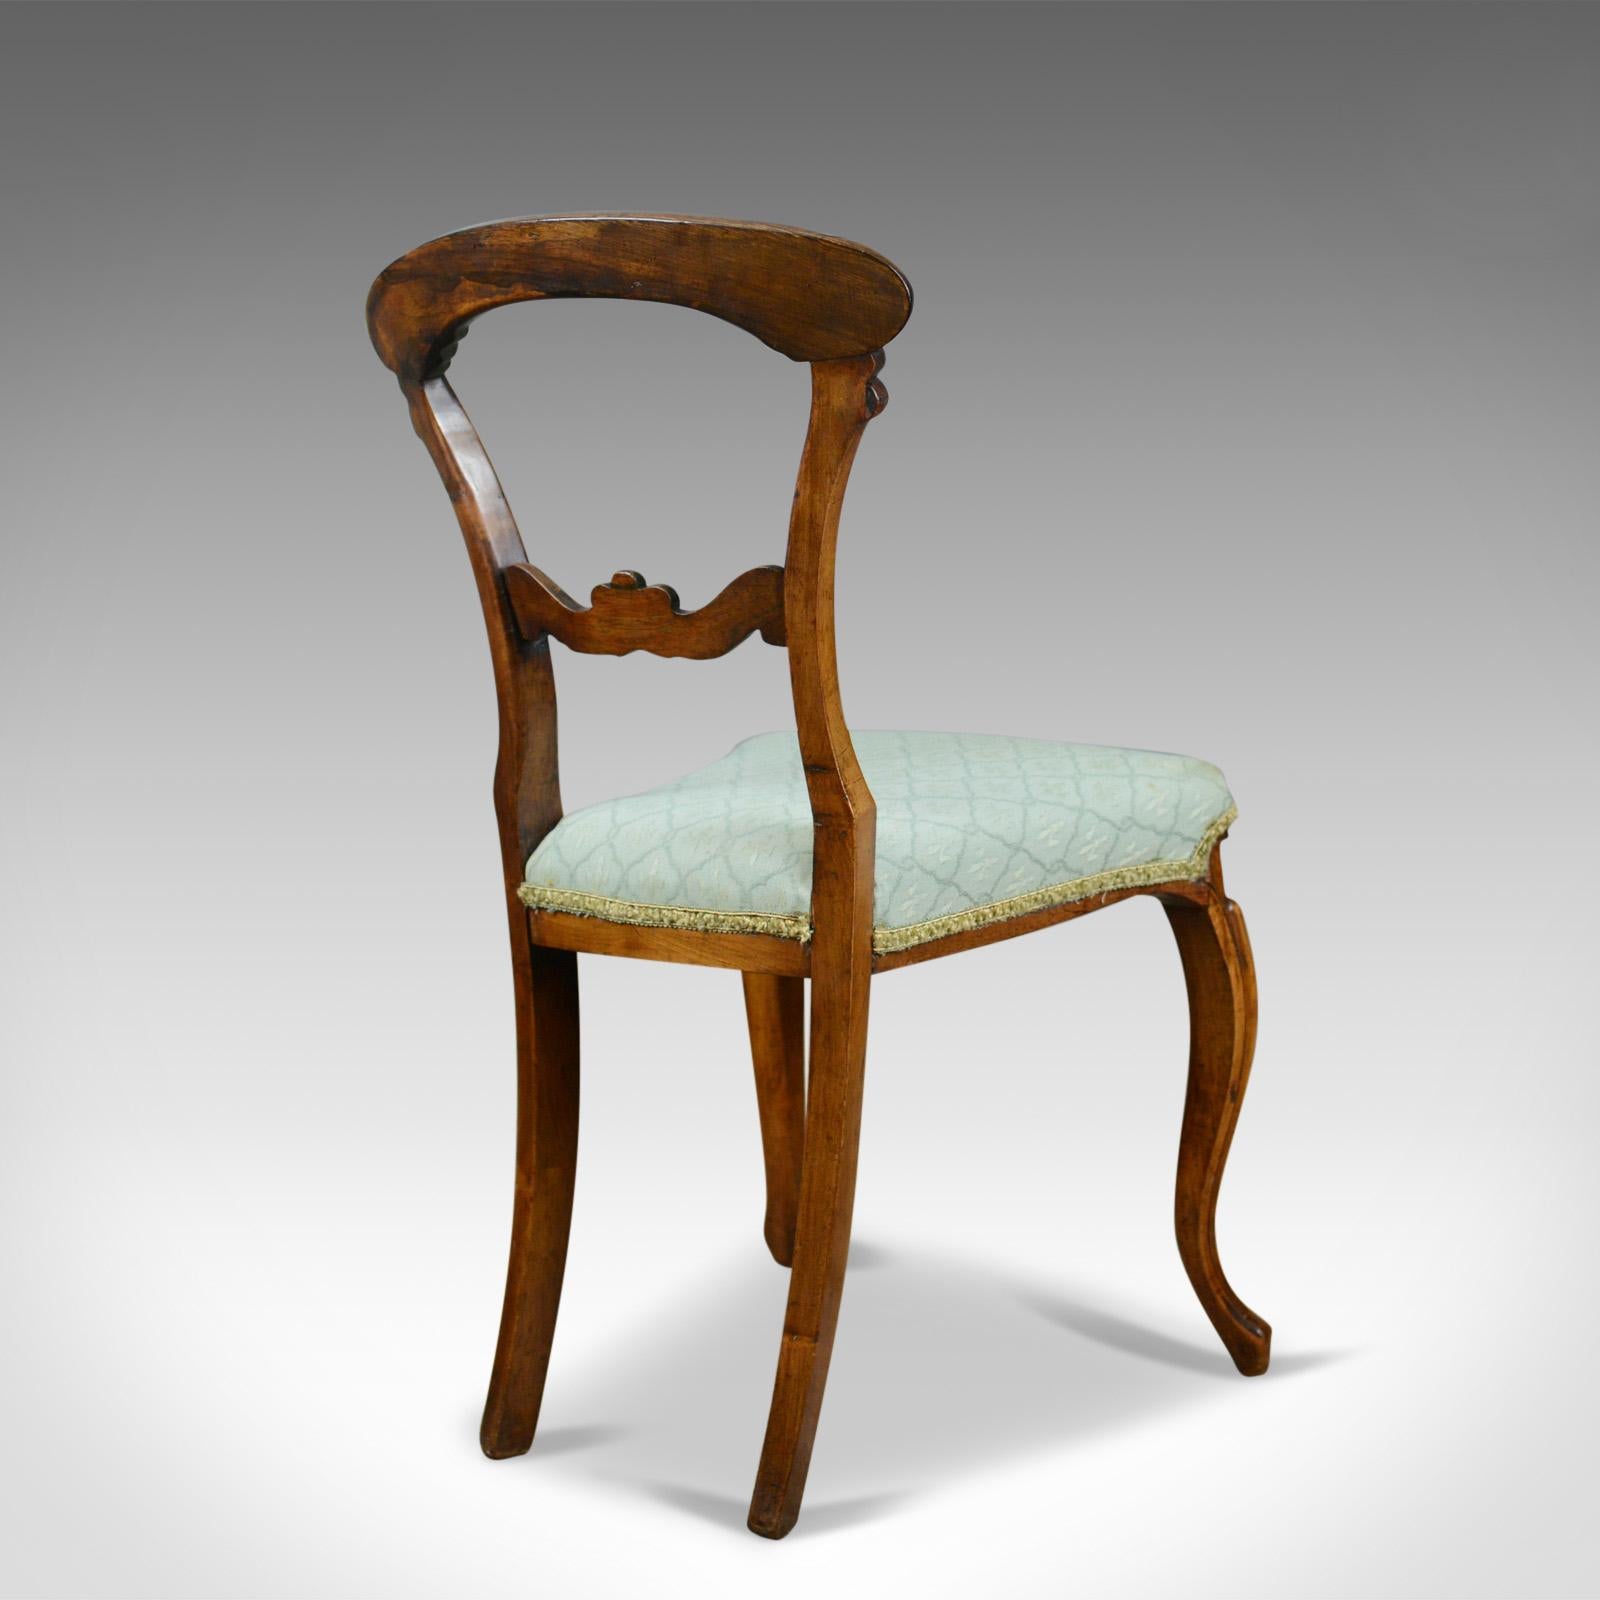 19th Century Antique Set of Four Dining Chairs, English, William IV, Rosewood, circa 1835